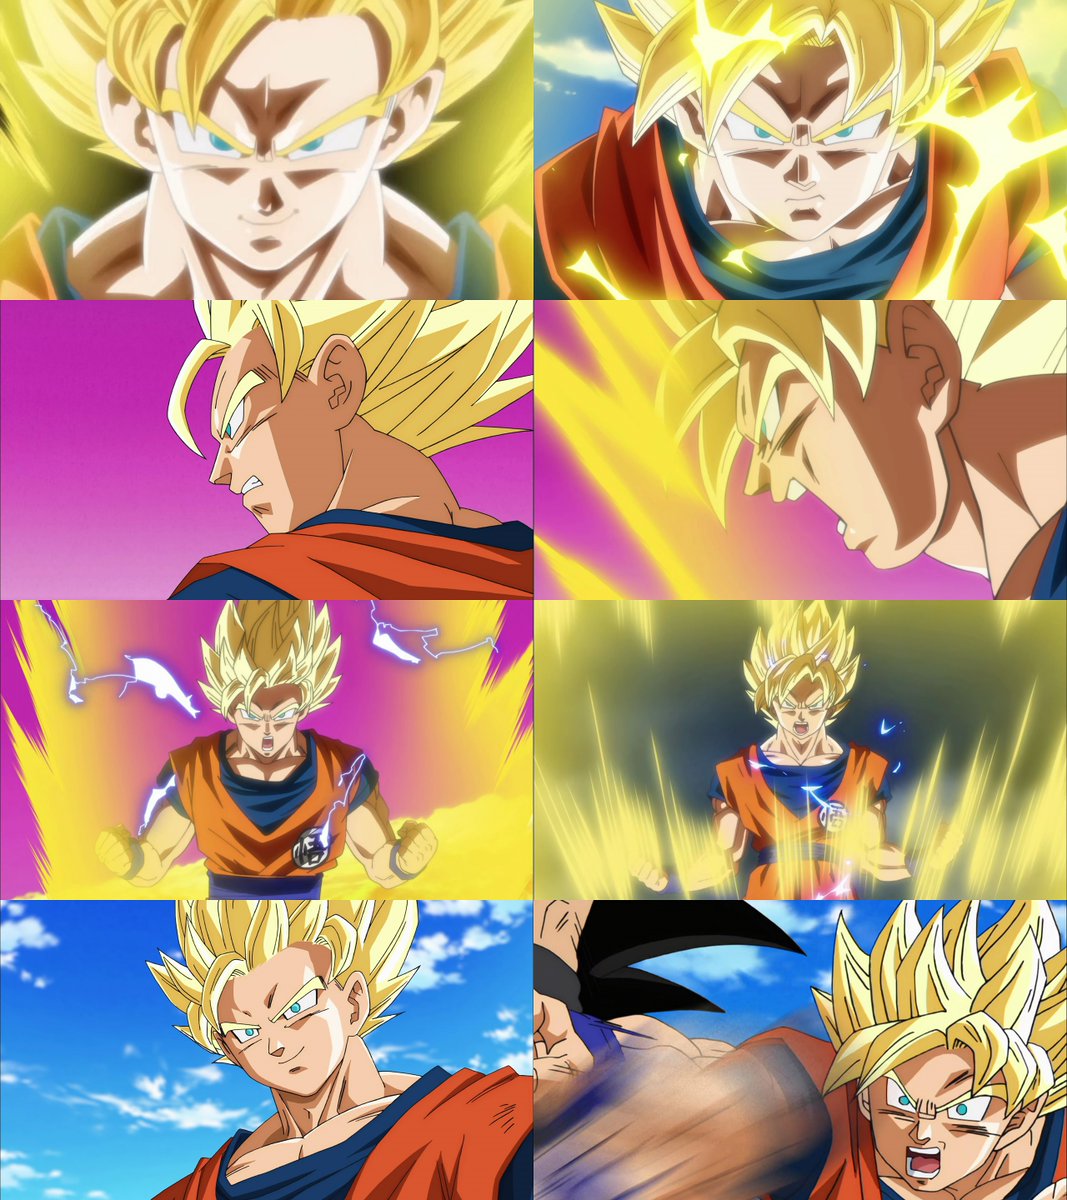 Lonely on X: The occasions when they drew Super Saiyan 2 Goku